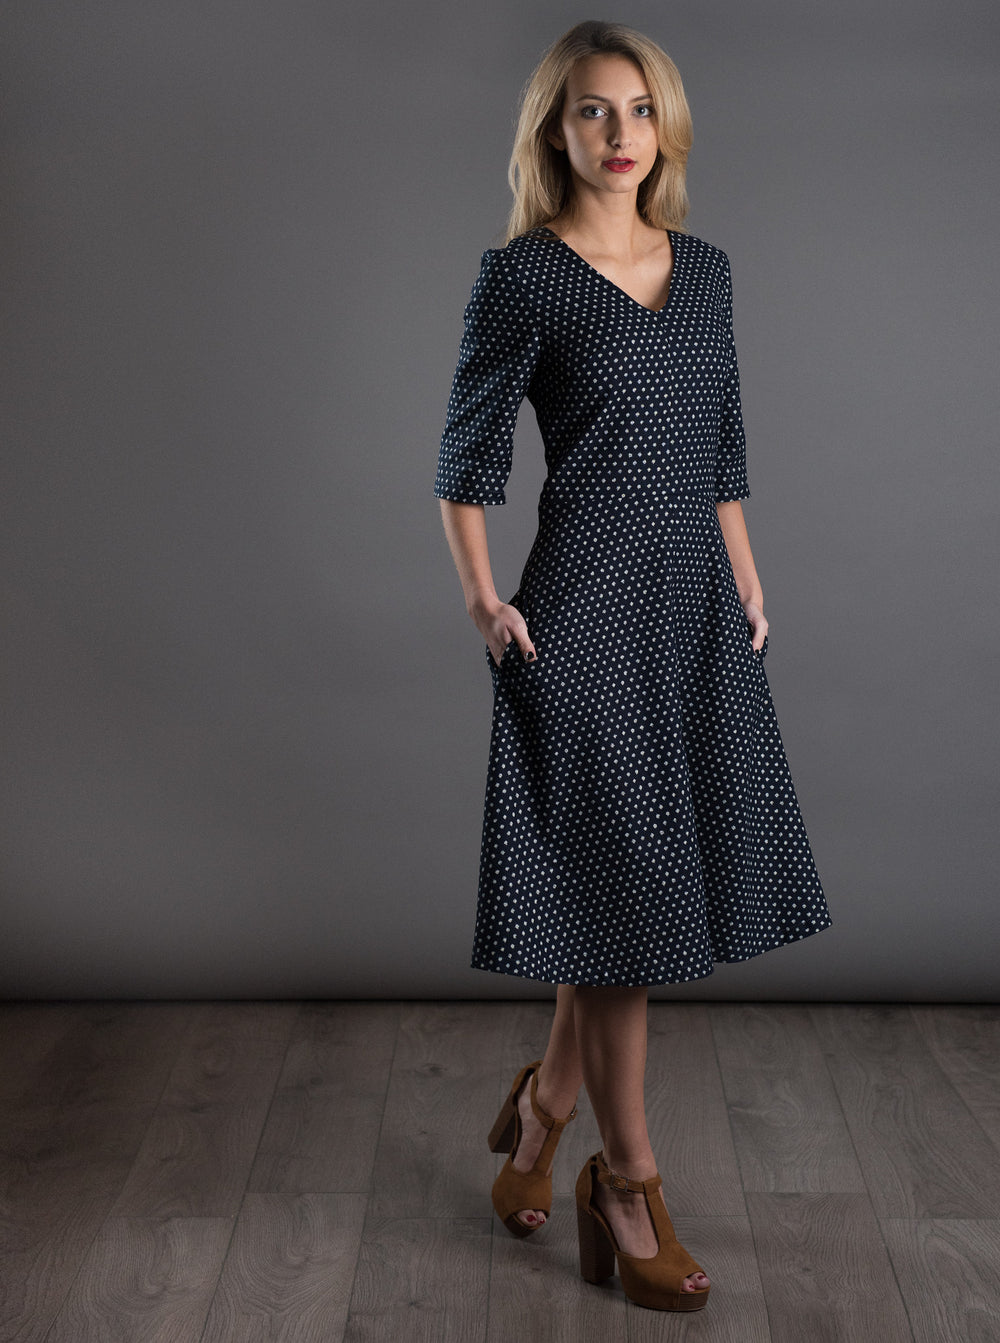 Woman wearing The A-Line Dress sewing pattern from The Avid Seamstress on The Fold Line. An A-line dress pattern made in chambray, crepes, silk, viscose or cottons fabrics, featuring a fitted bodice, elbow length sleeves, V-neckline, in-seam pockets, knee